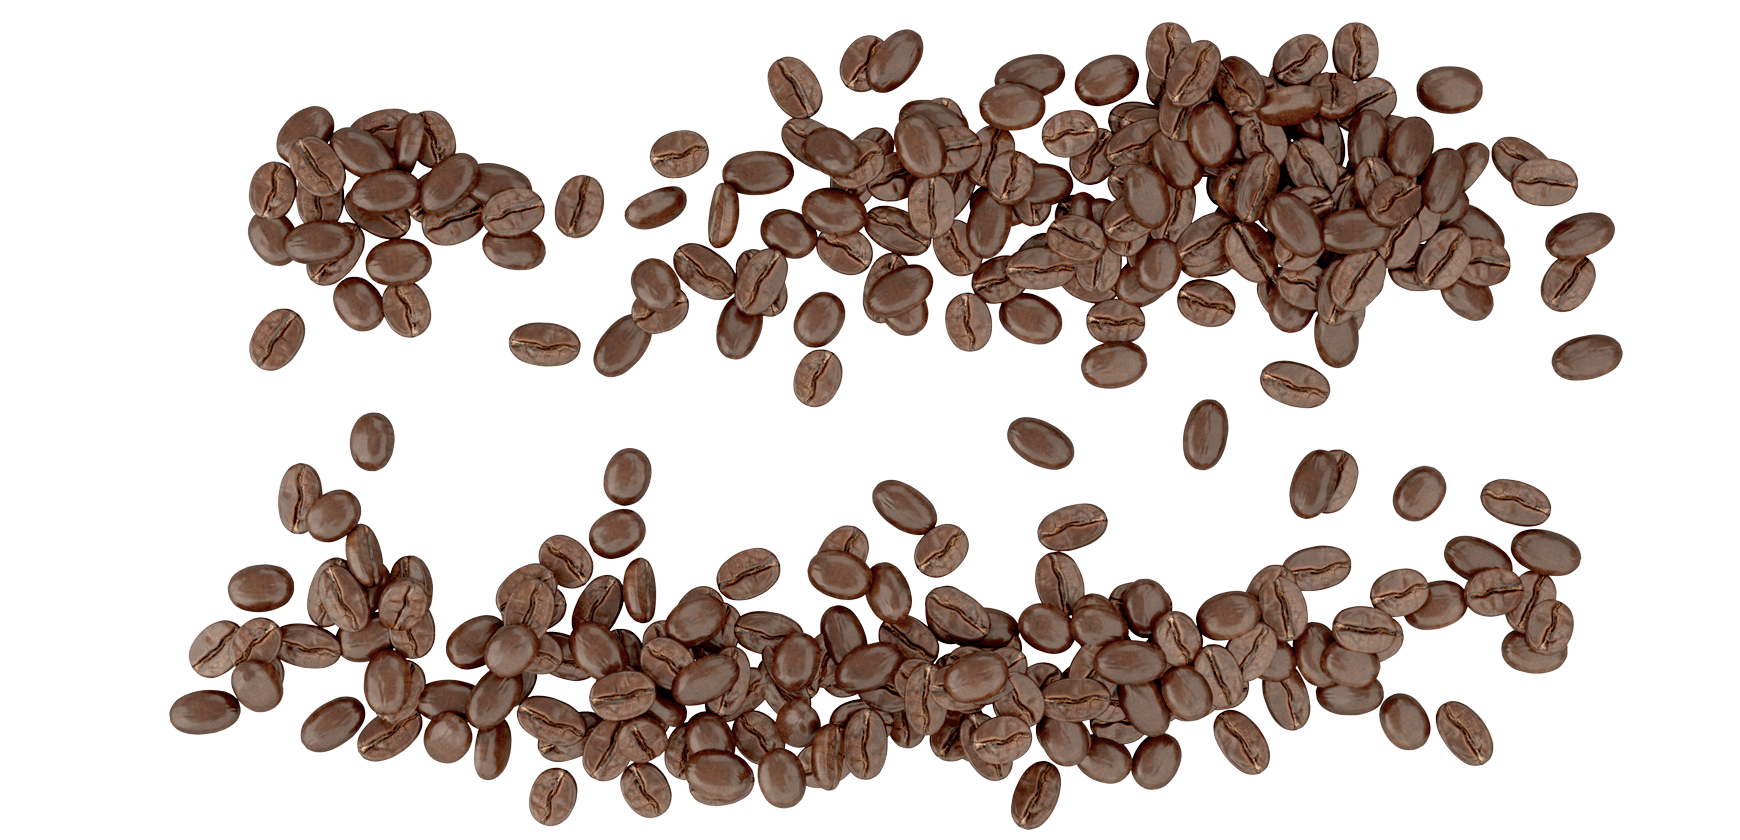 Scattered medium coffee beans